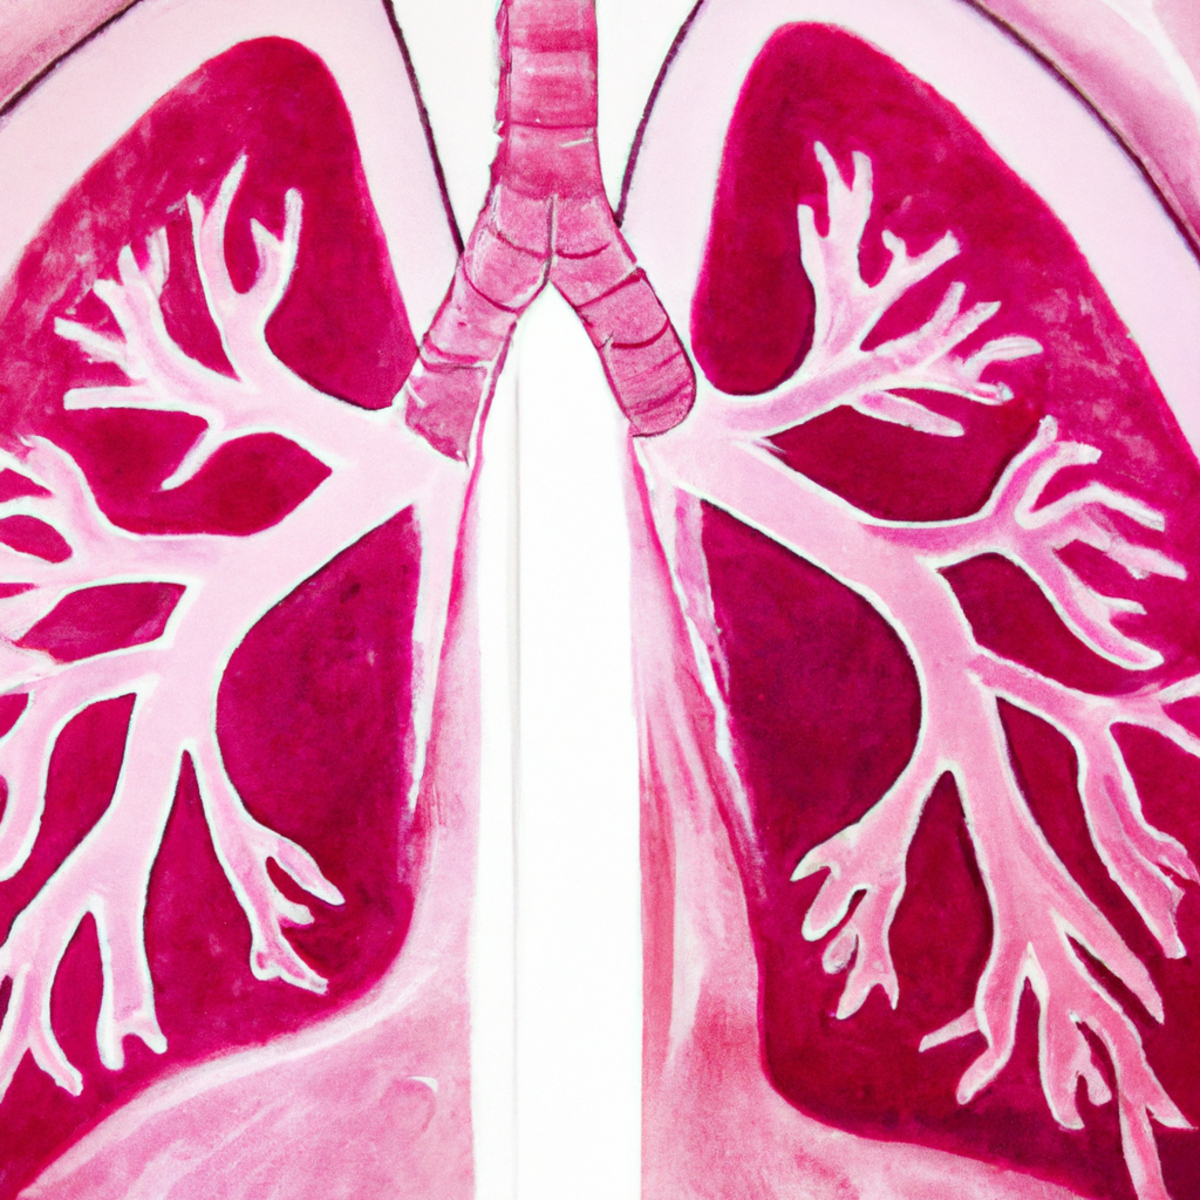 Close-up of healthy lungs, vibrant pink hue, intricate network of blood vessels and airways, devoid of human presence -Lymphangioleiomyomatosis (LAM)